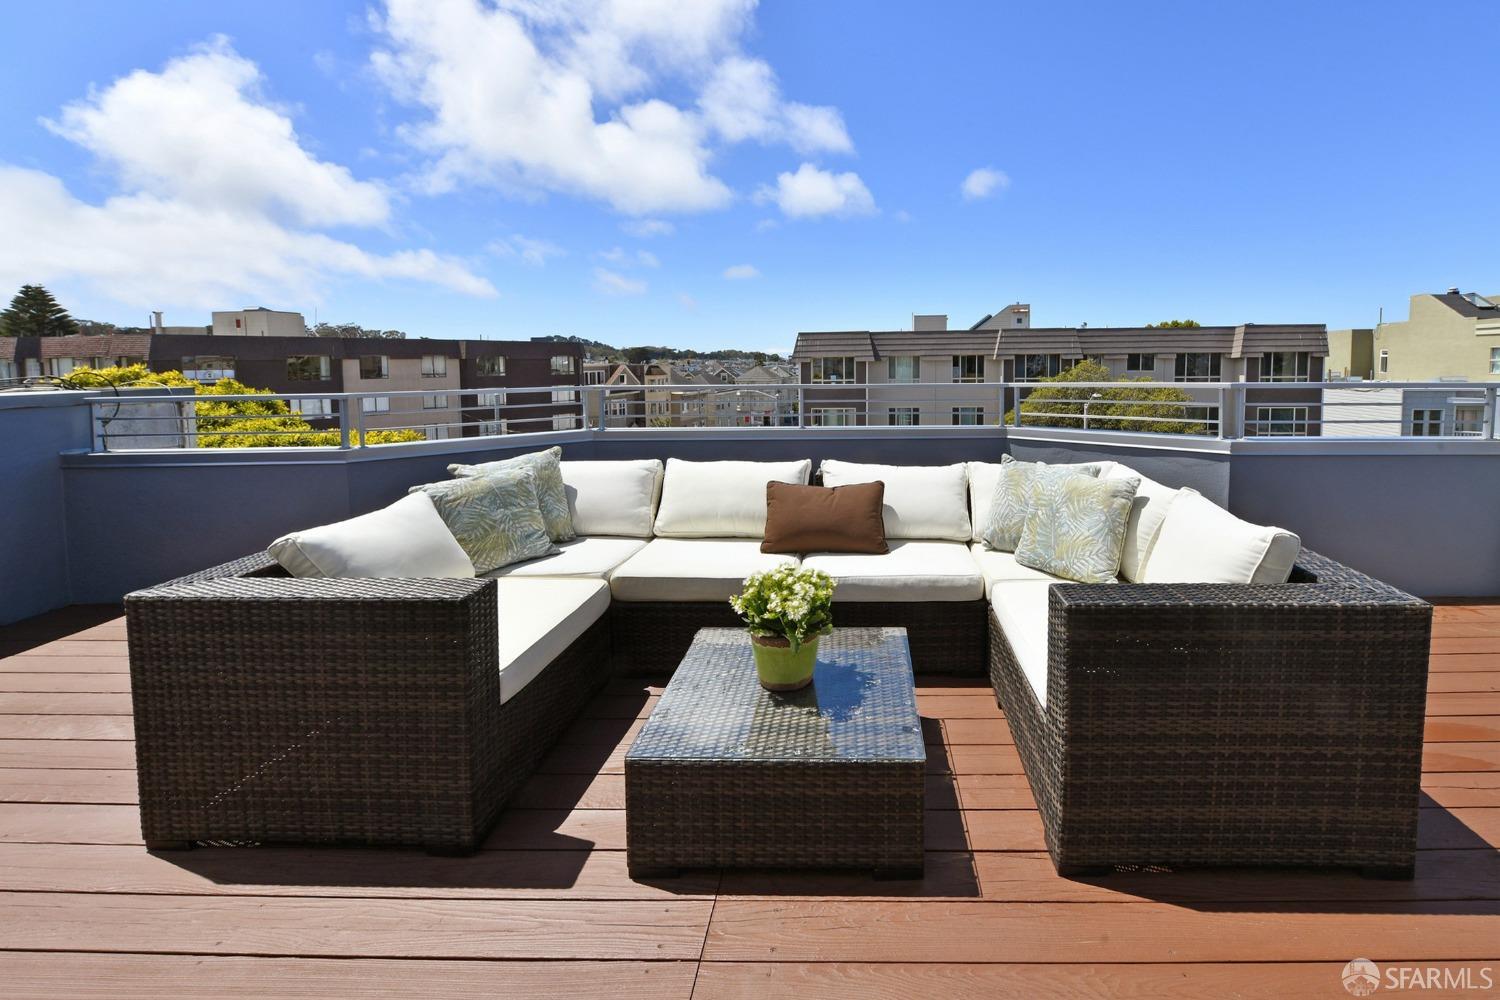 a view of roof deck with furniture